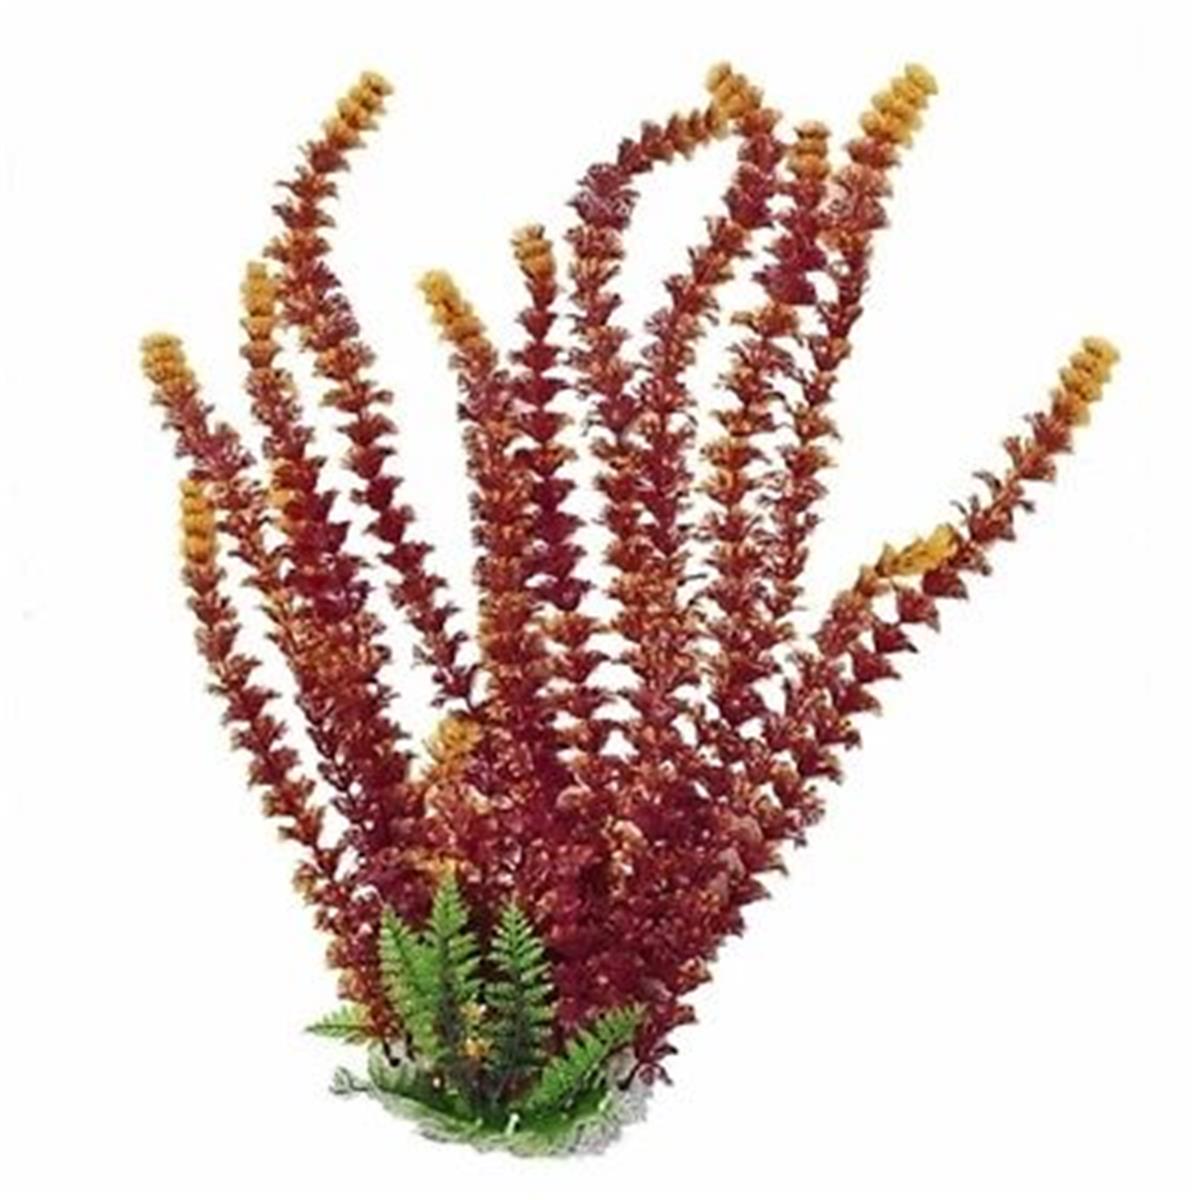 Picture of Aquatop Aquatic Supplies 003602 16 in. Cabomba Fire Aquarium Plant with Weighted Base - Red & Yellow